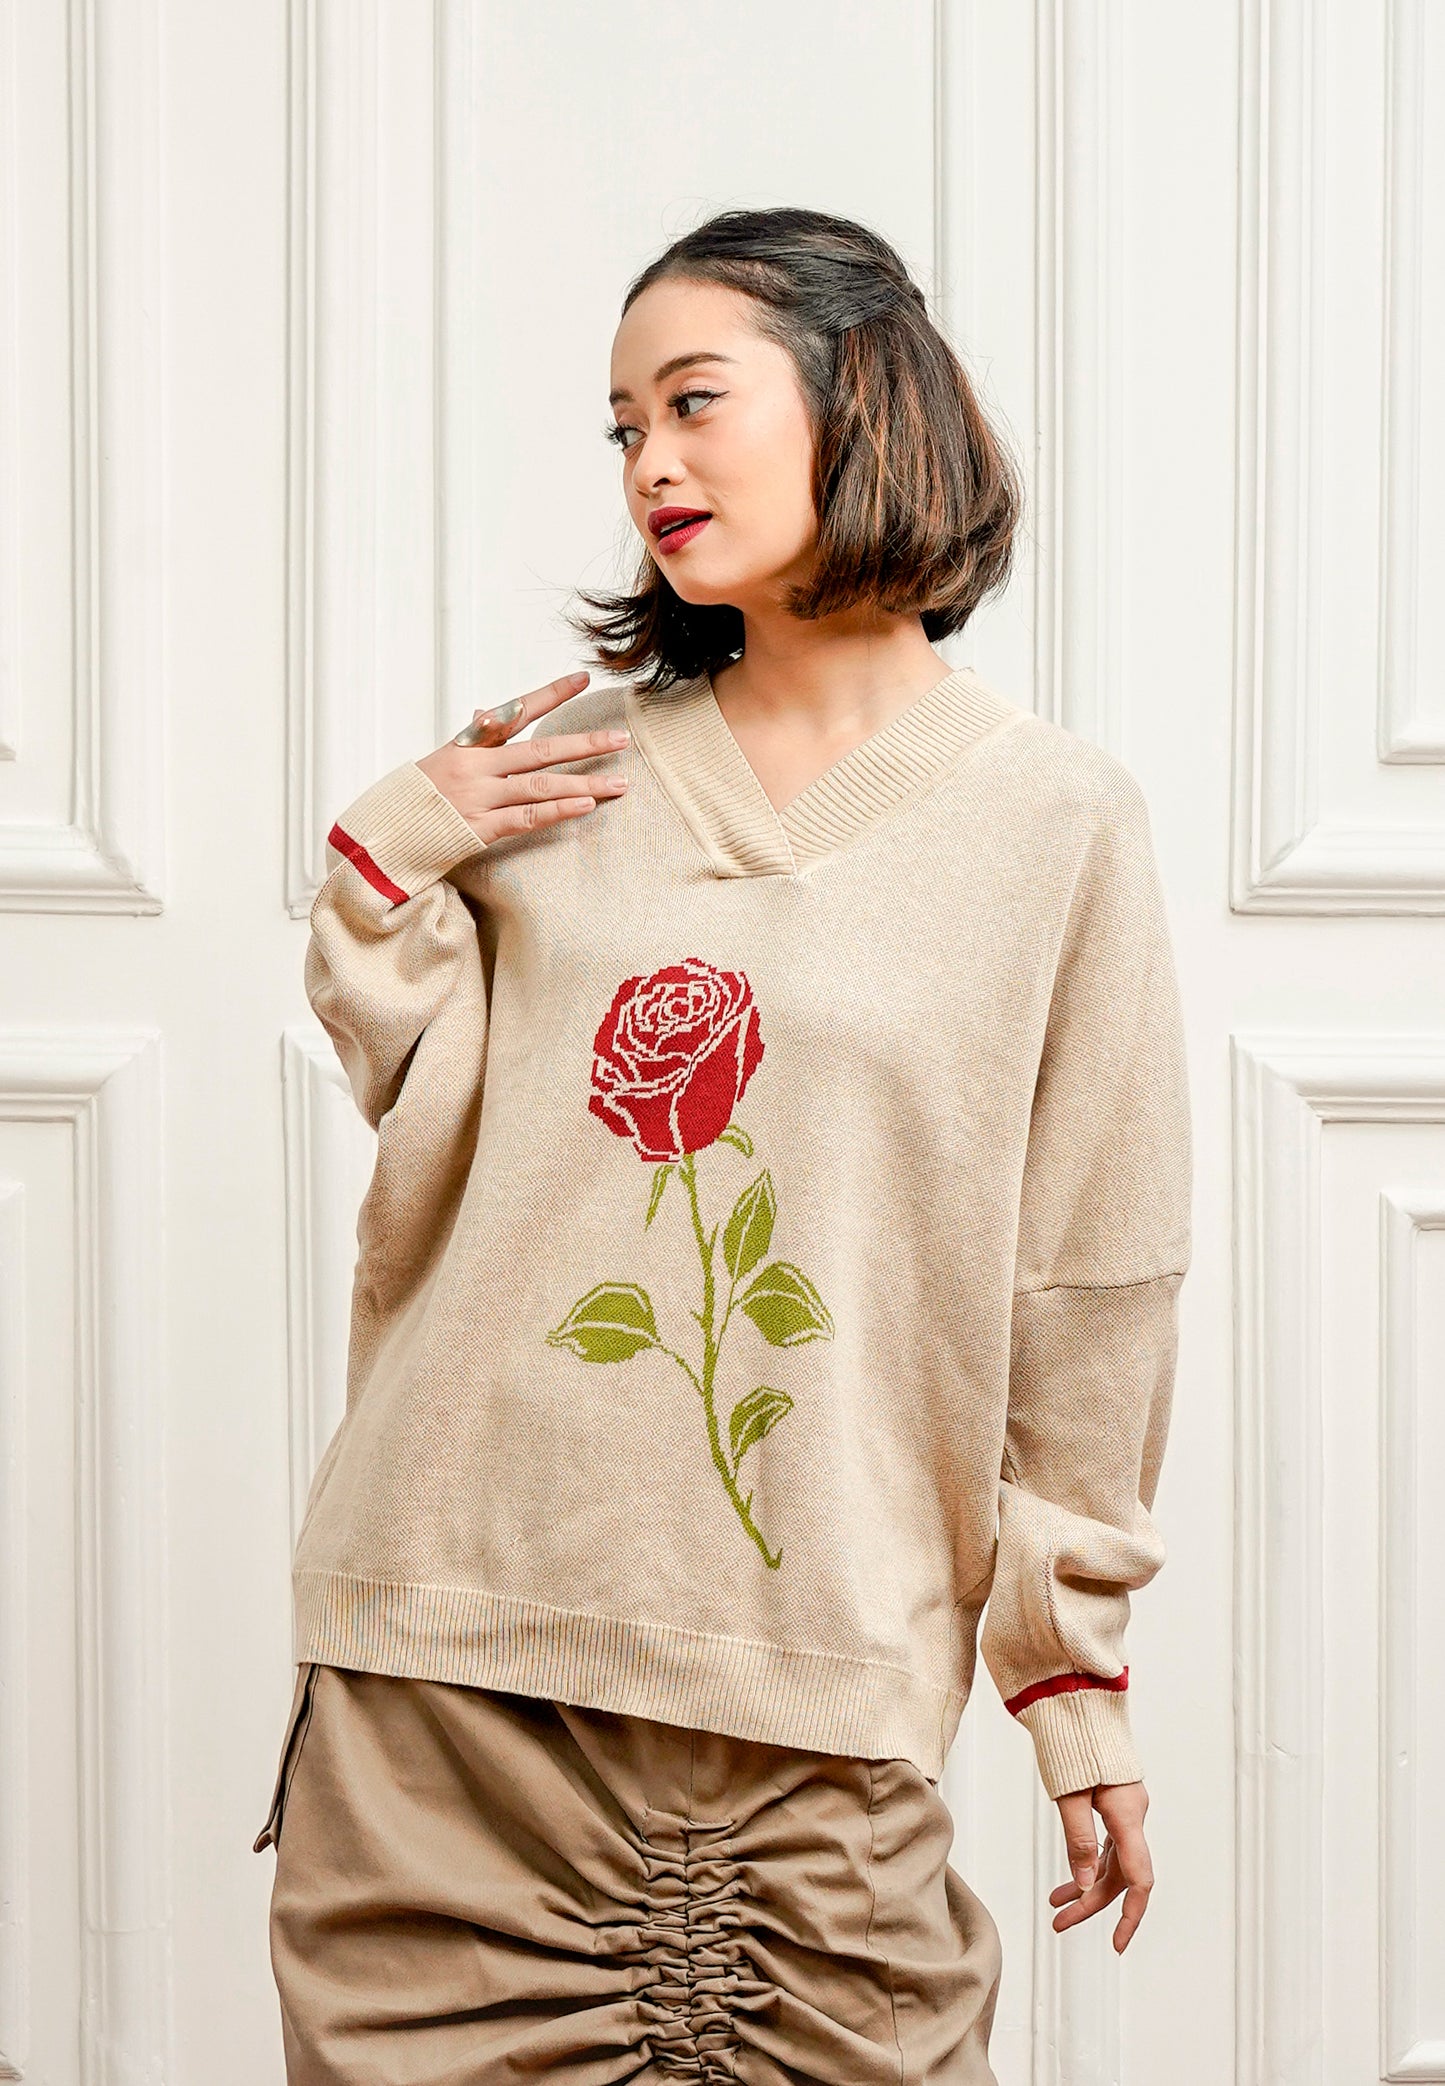 NONA Myrtle Knitted Top Long Sleeve Nude